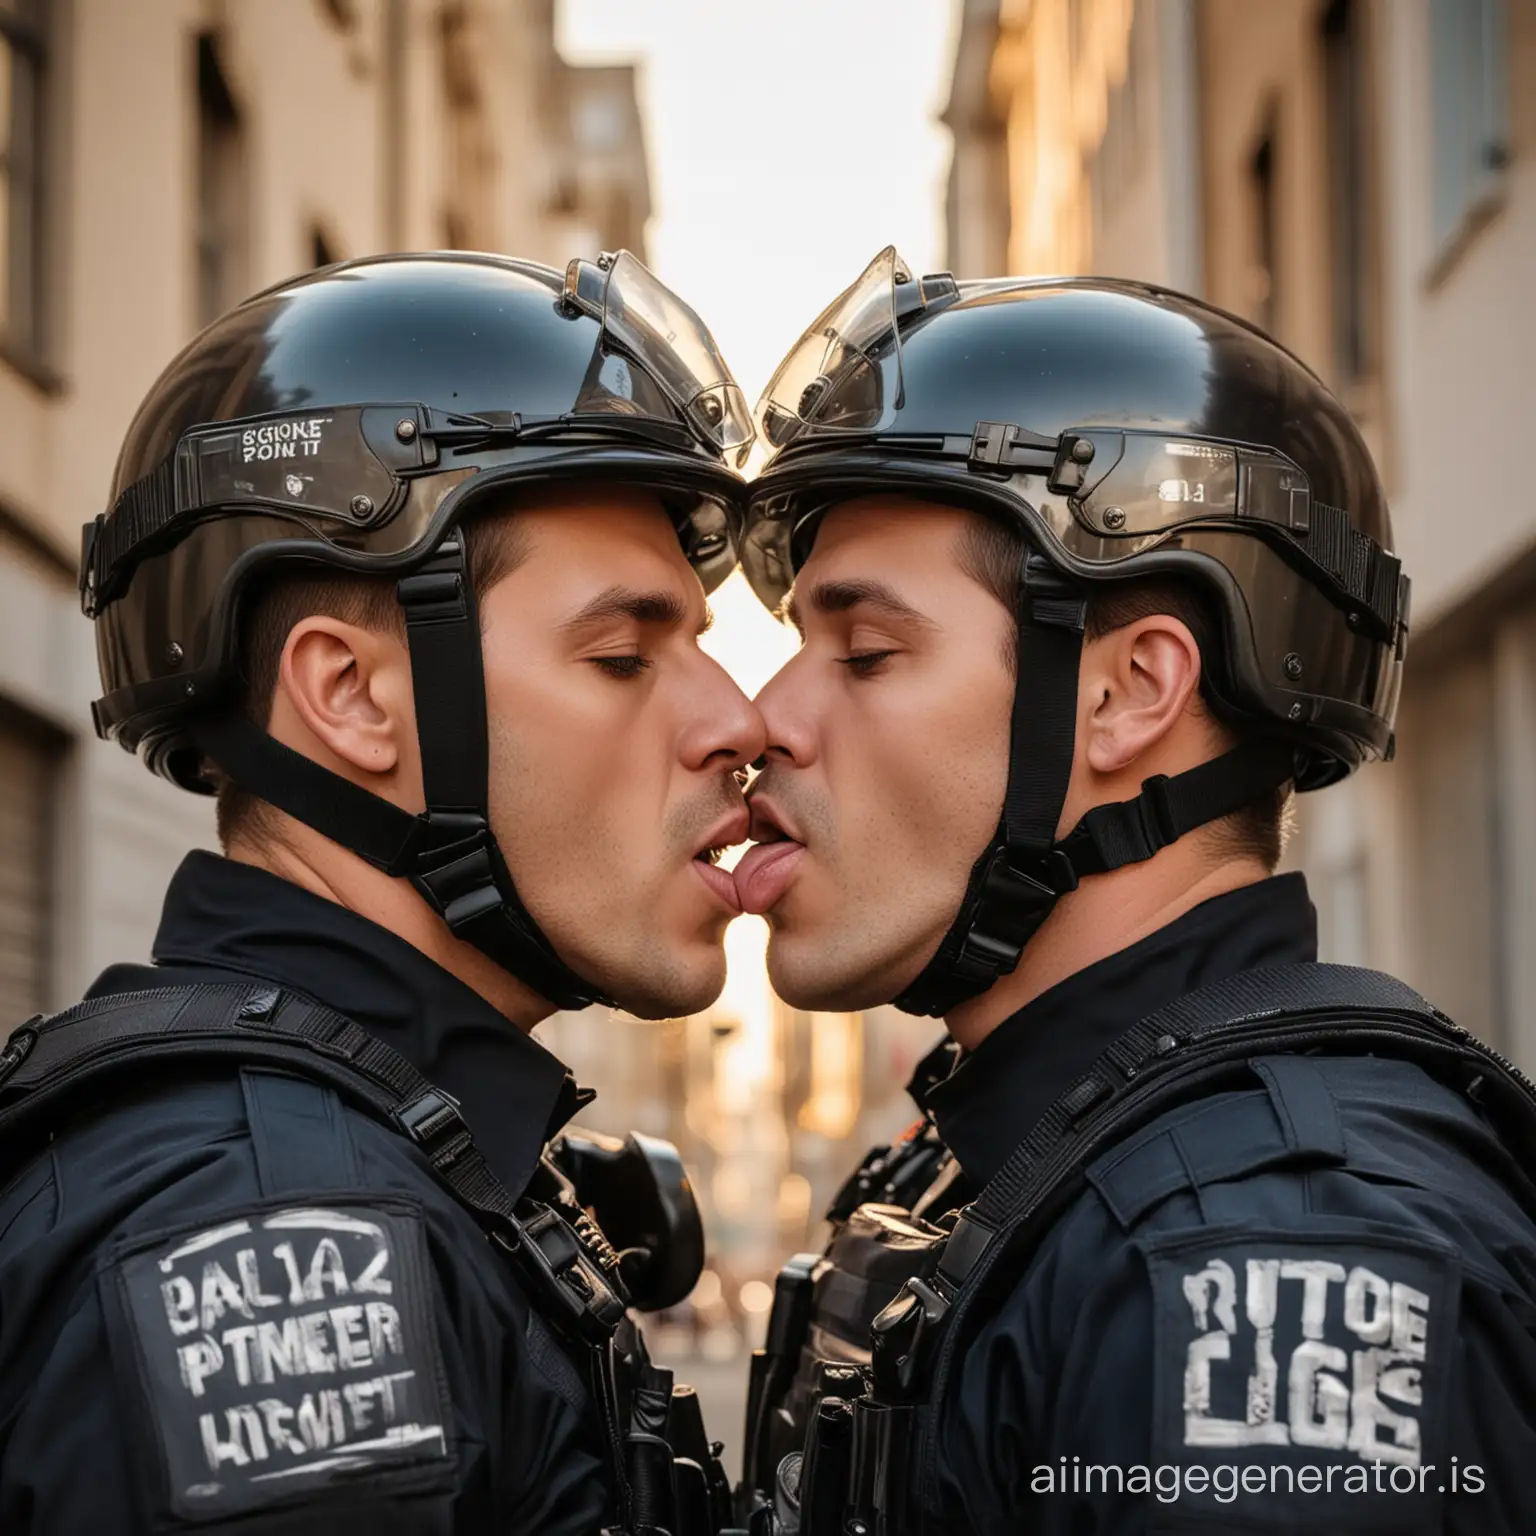 two policemen in riot gear kiss passionately on the mouth Frontal portrait shot taken in the City, Golden Hour